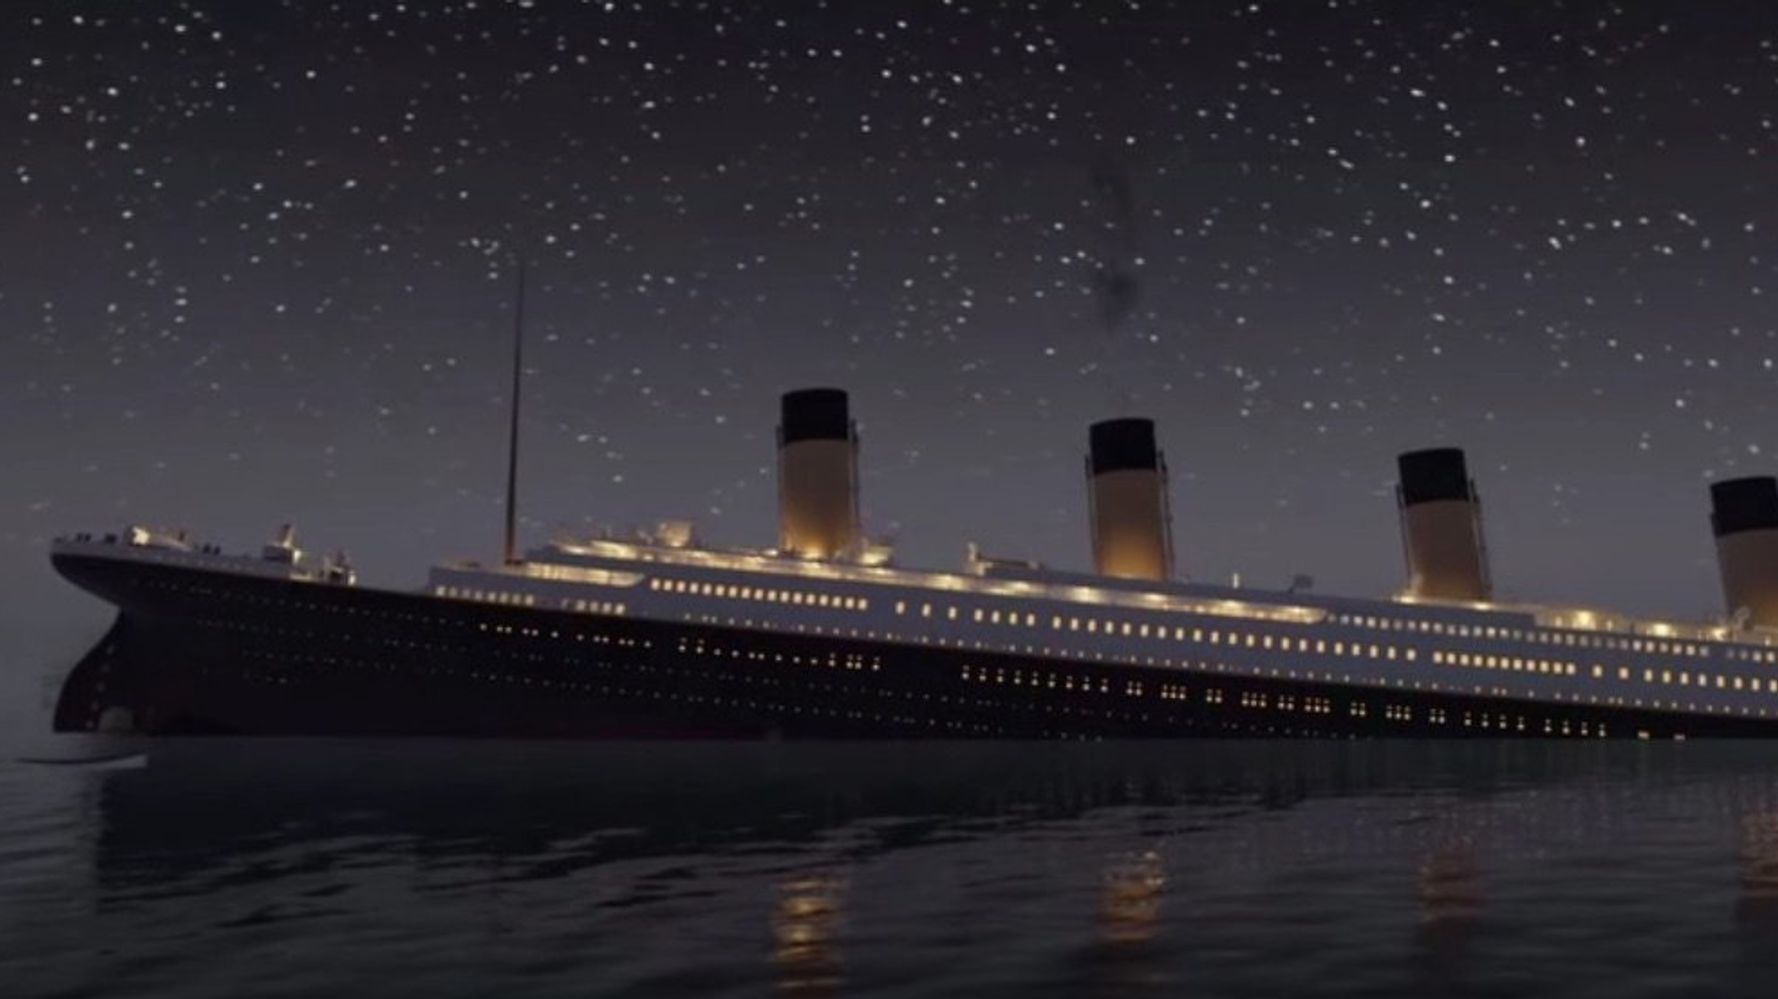 Watch The Titanic Sink In Real Time In Eerie Animated